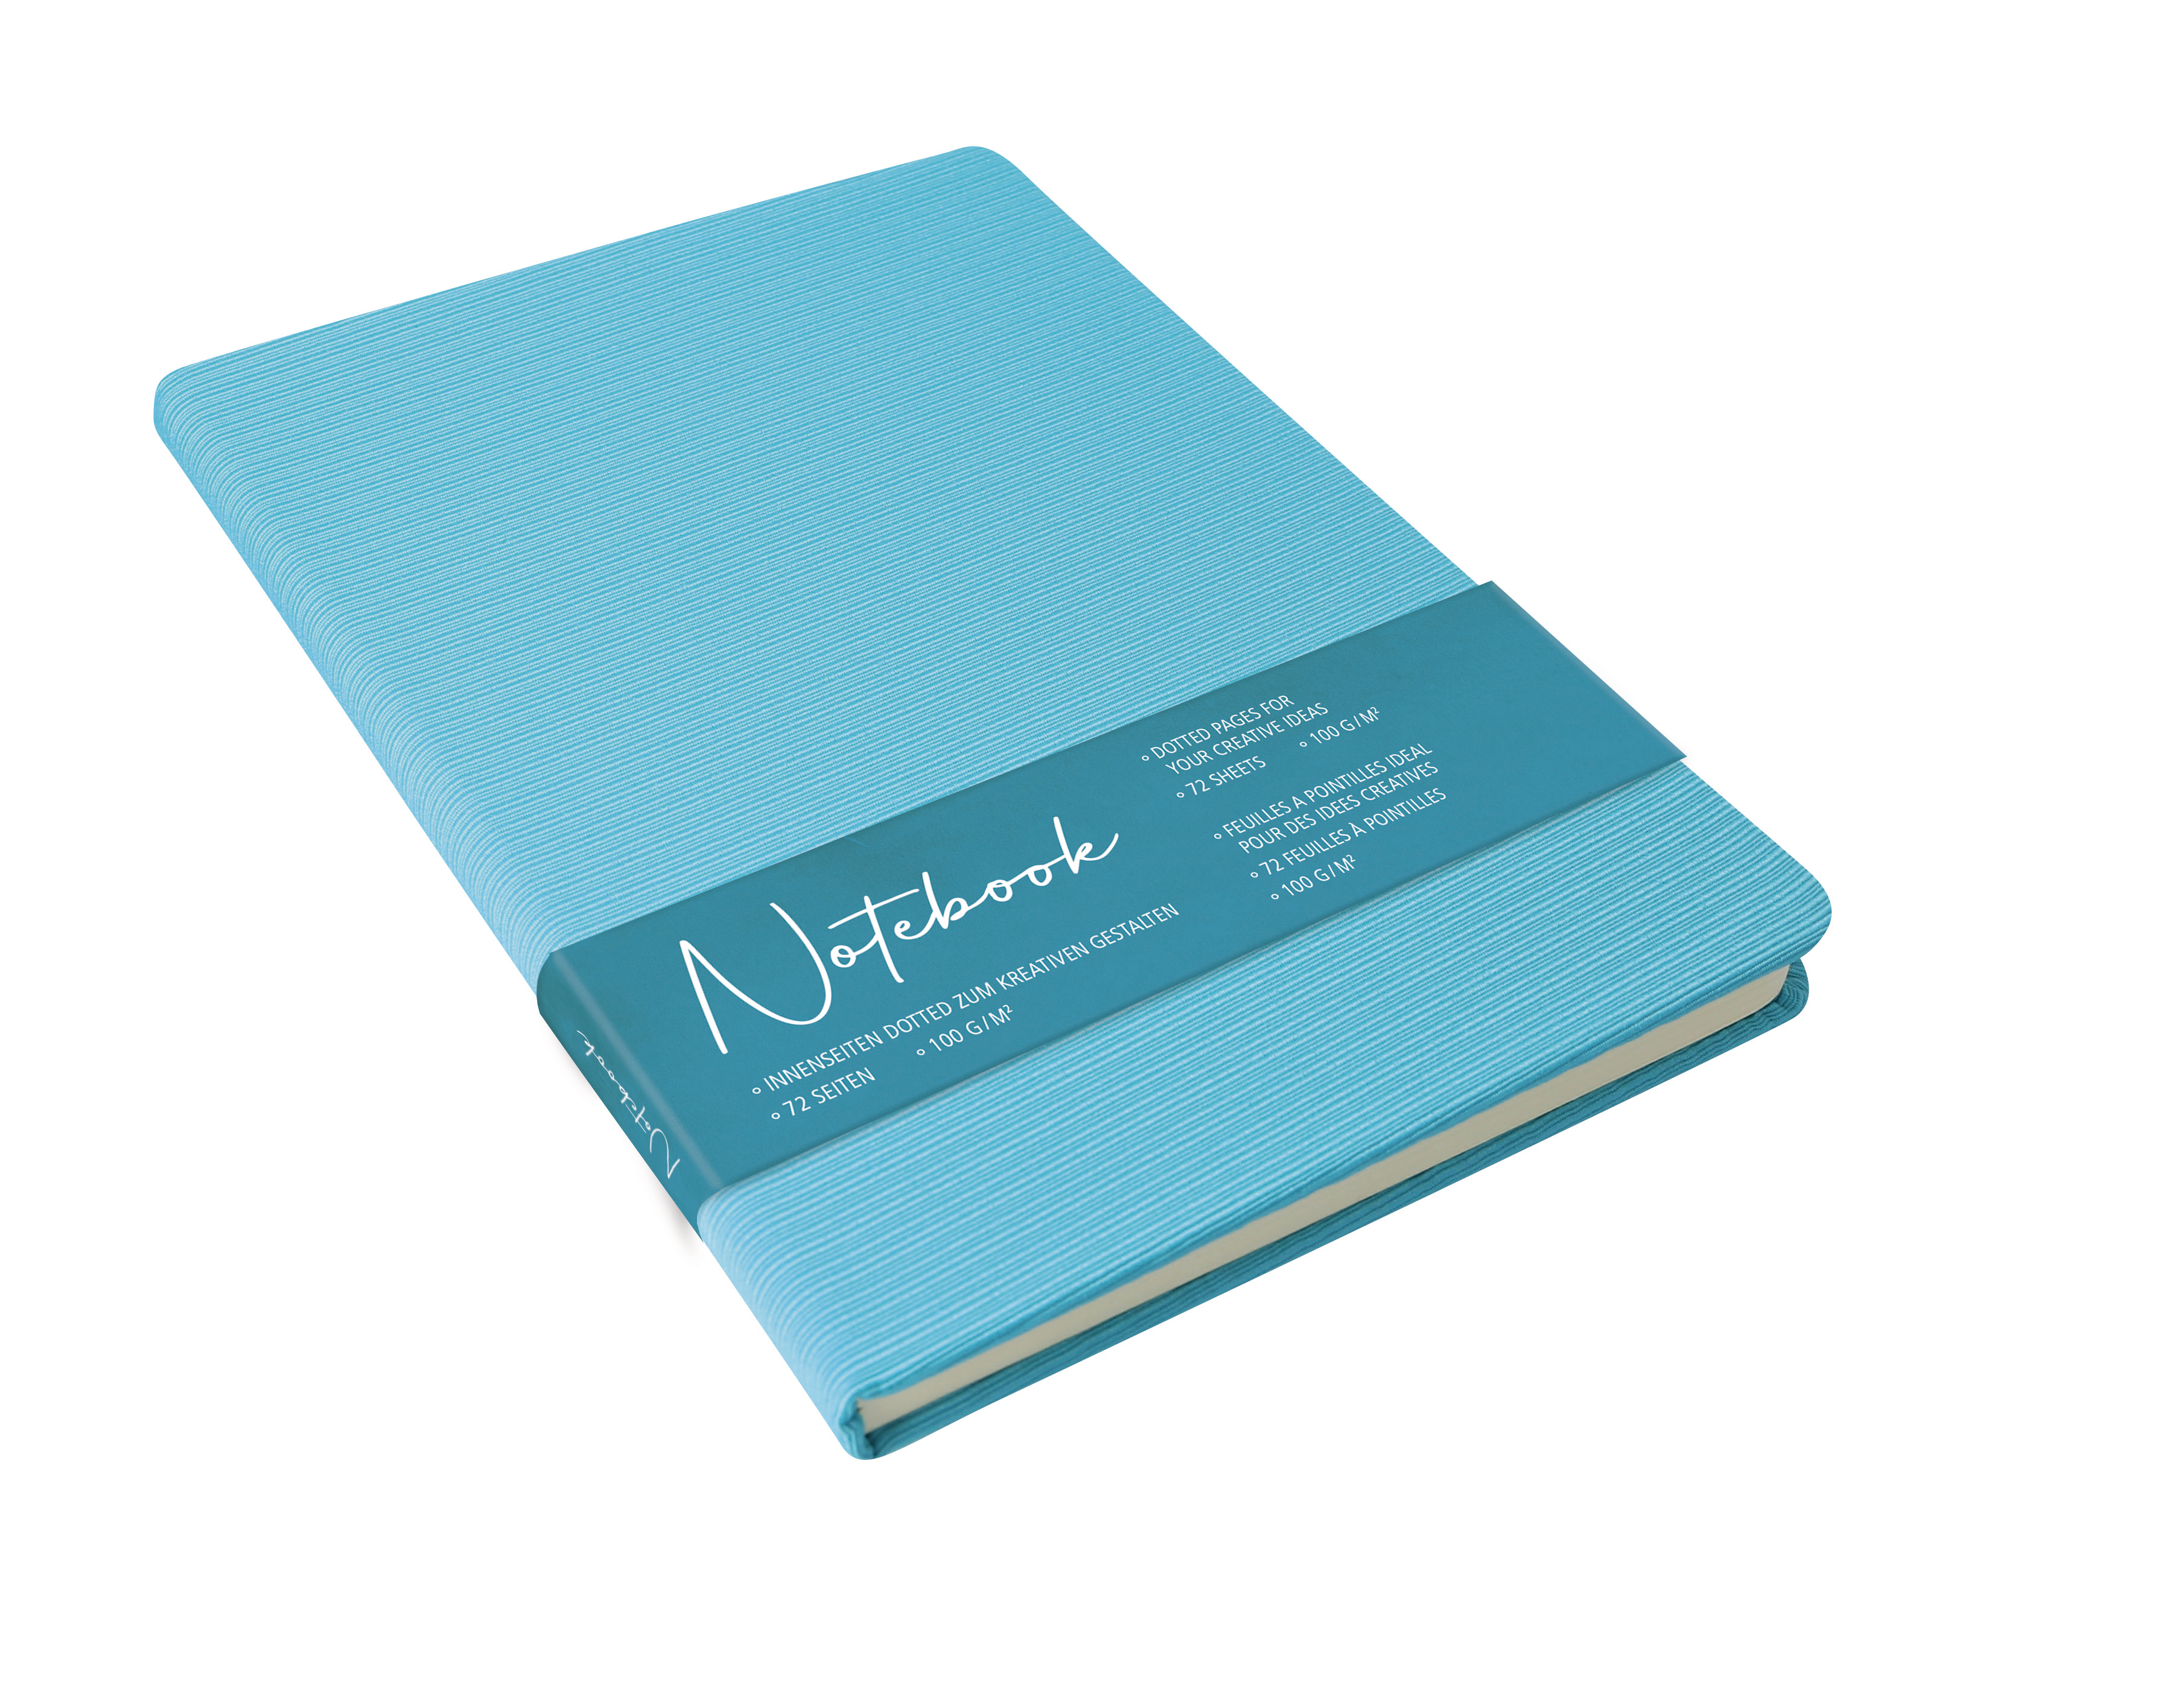 ONLINE Carnet A5 08374/6 turquoise, 72 pages, dotted